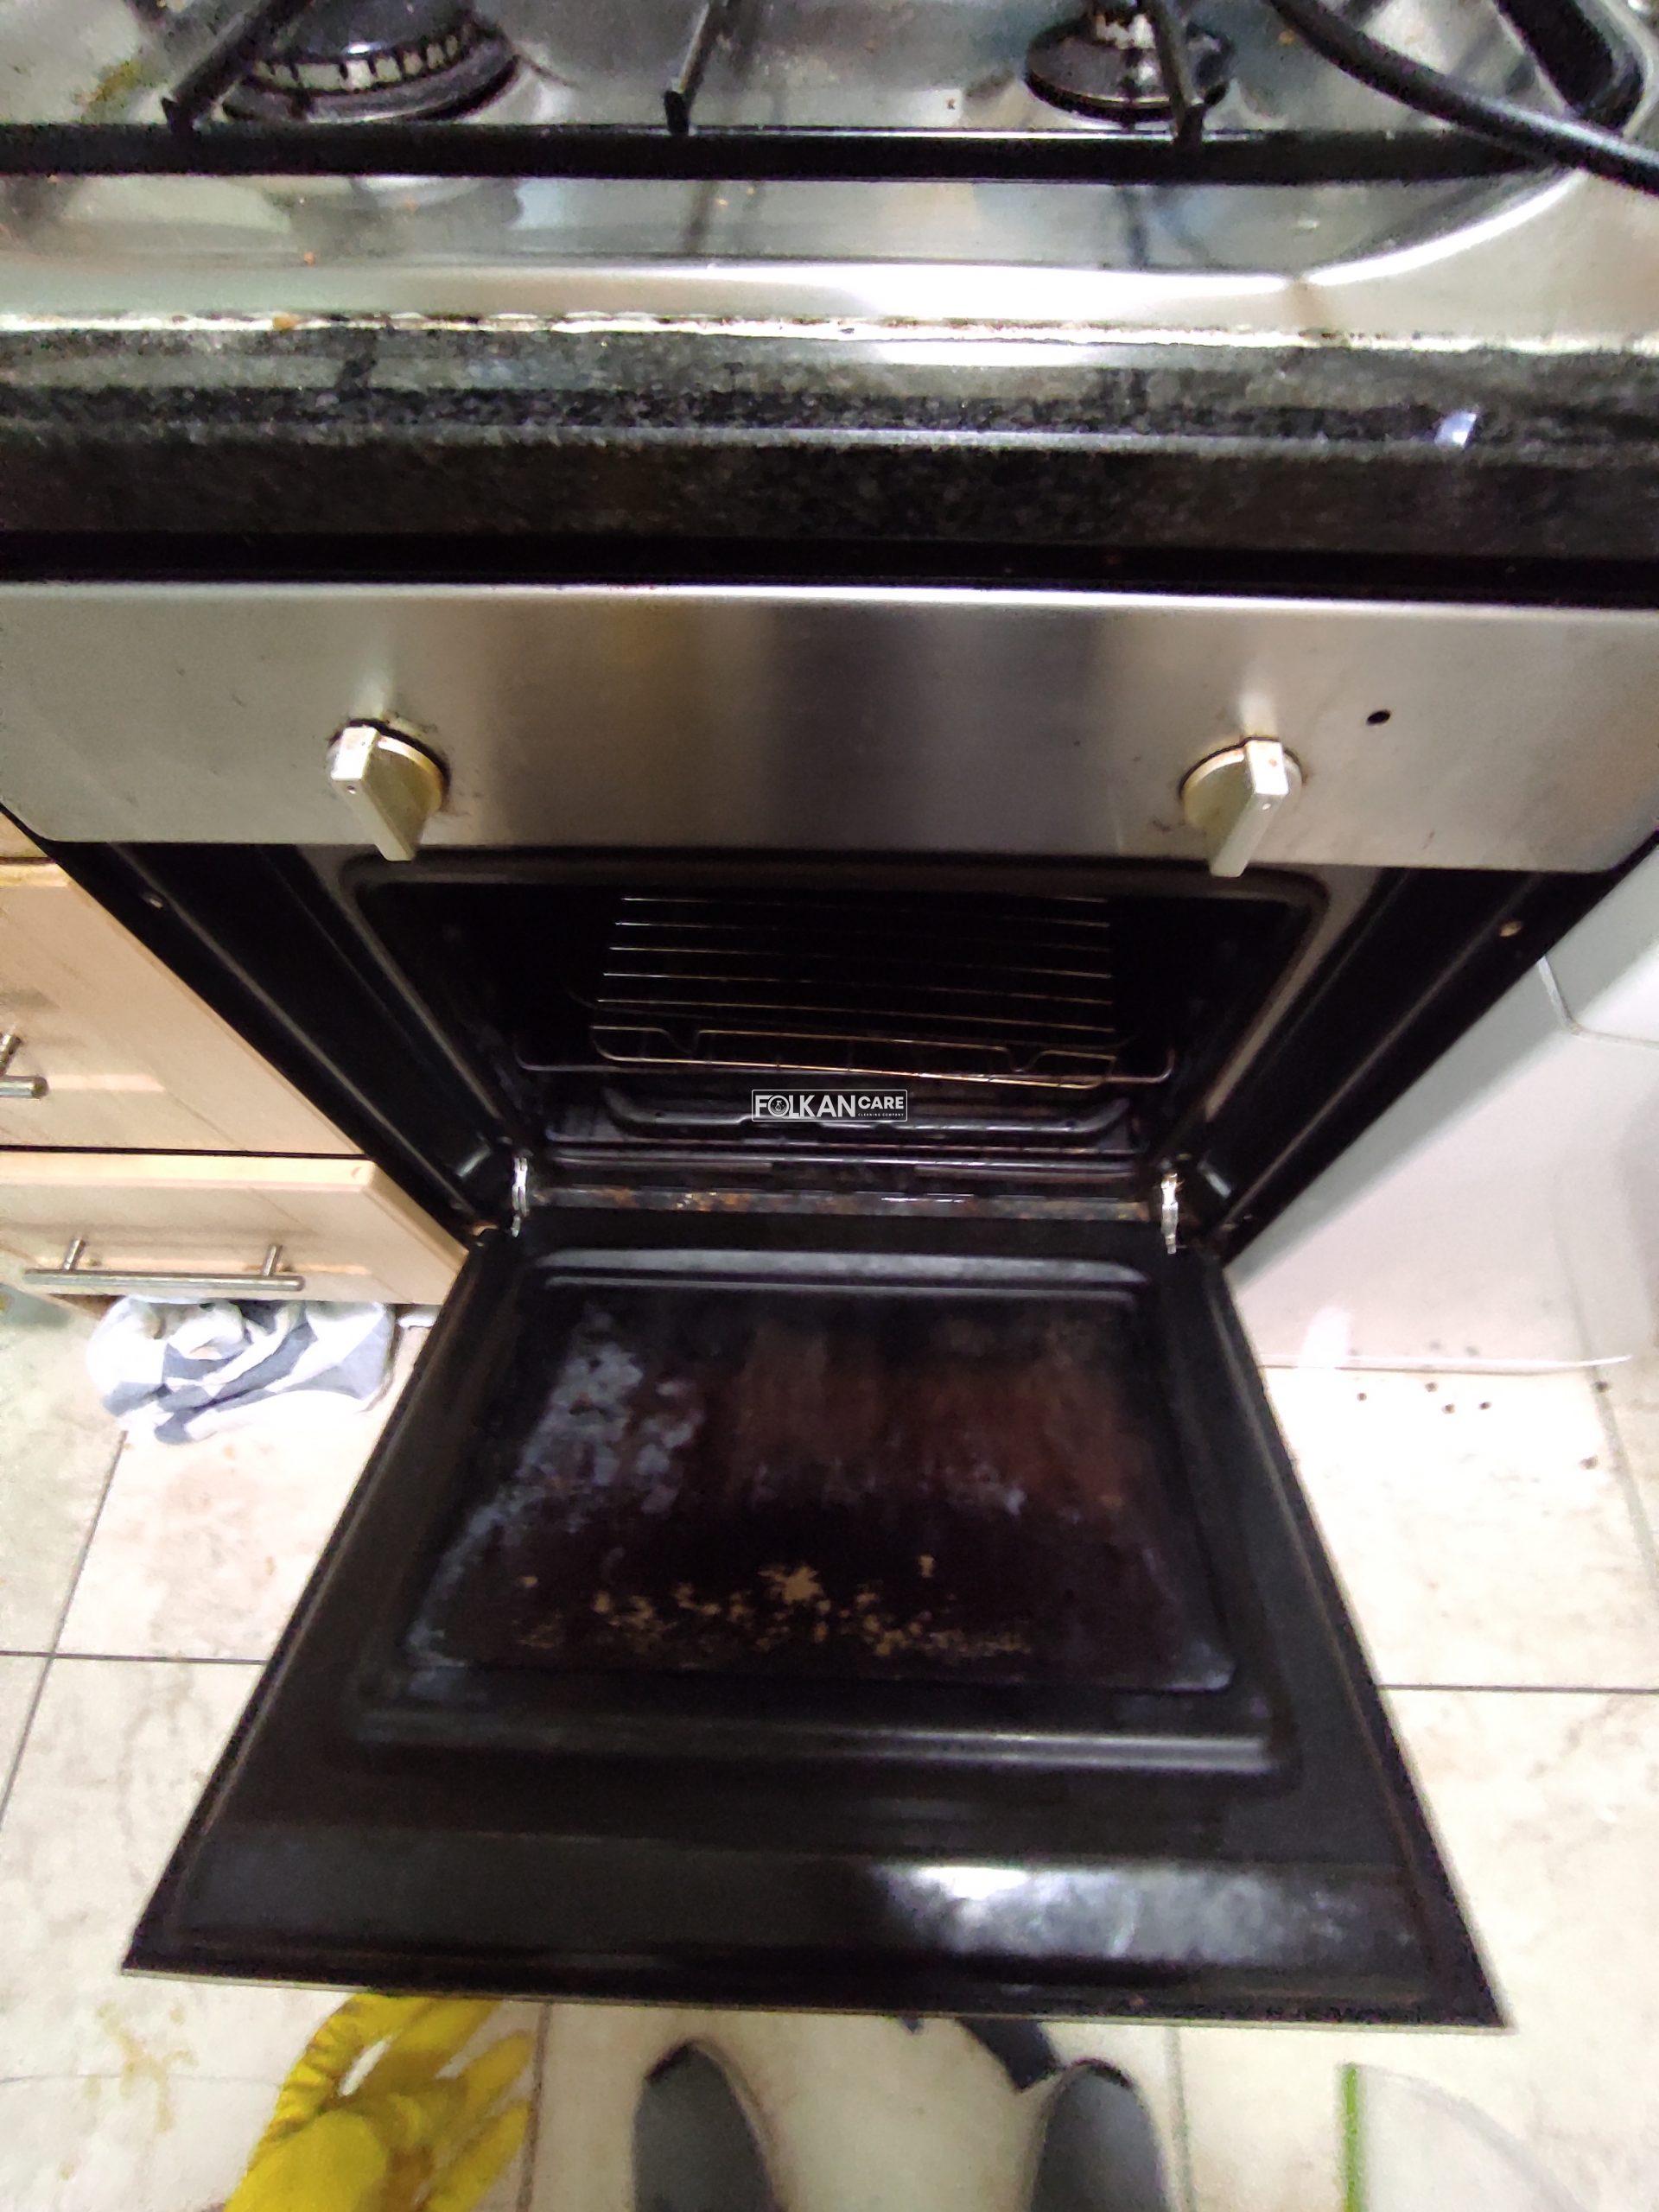 Cleaning Expert Shares: How To Clean The Oven Quickly